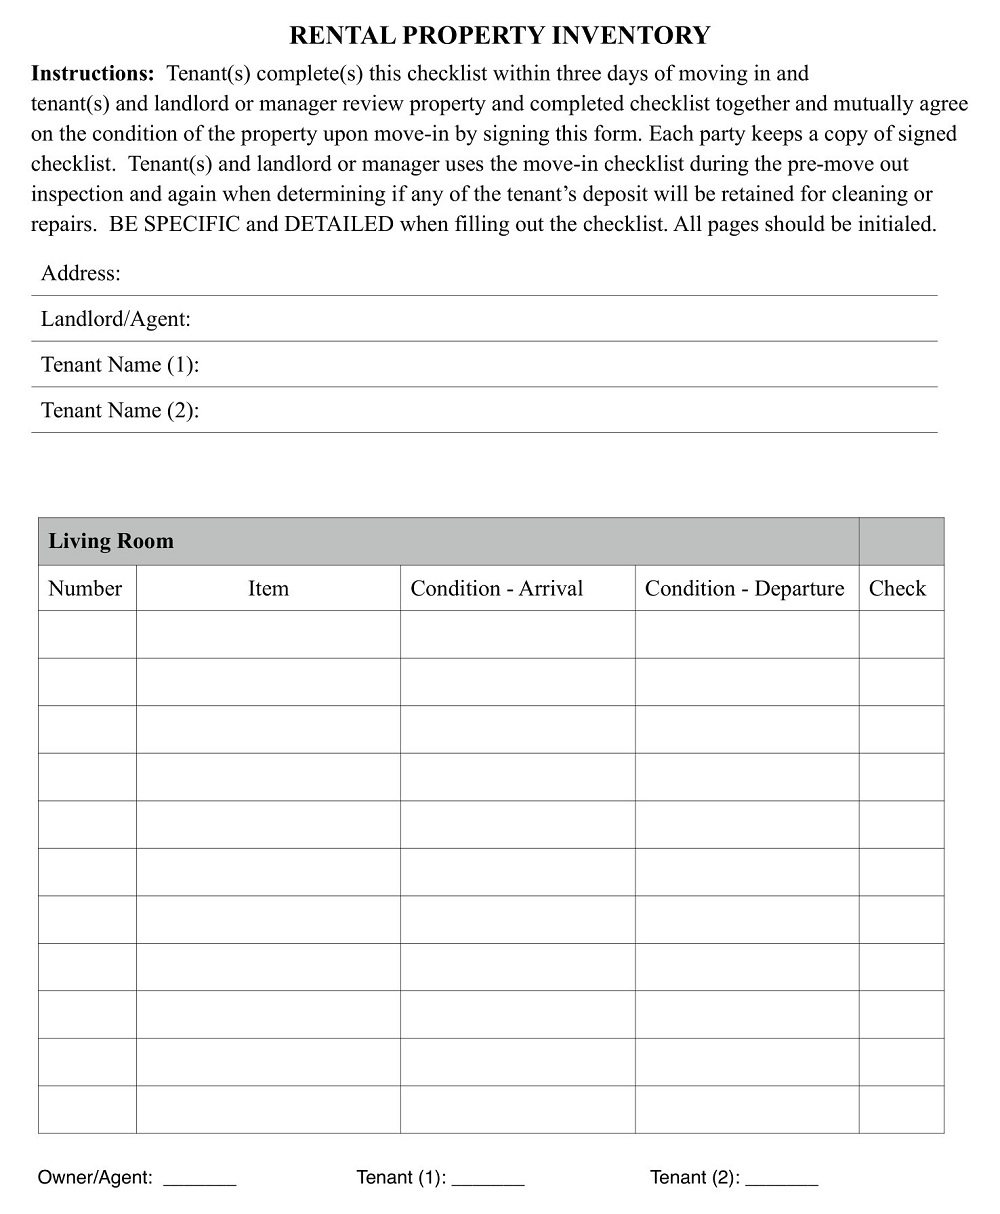 Rental Property Inventory Checklist Template